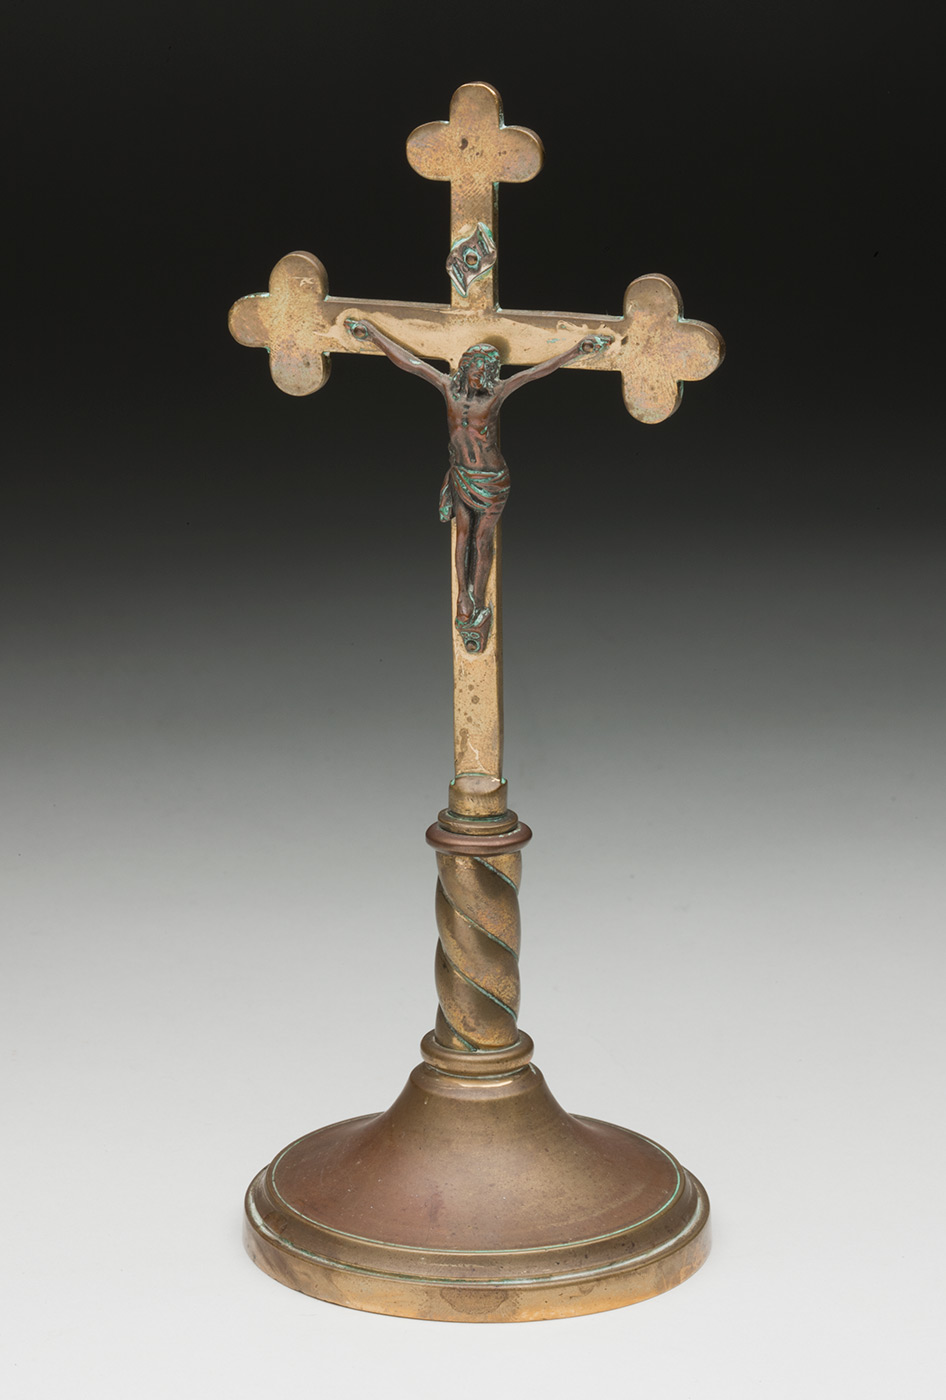 A copper cross and figure of Jesus mounted on a round stand. - click to view larger image